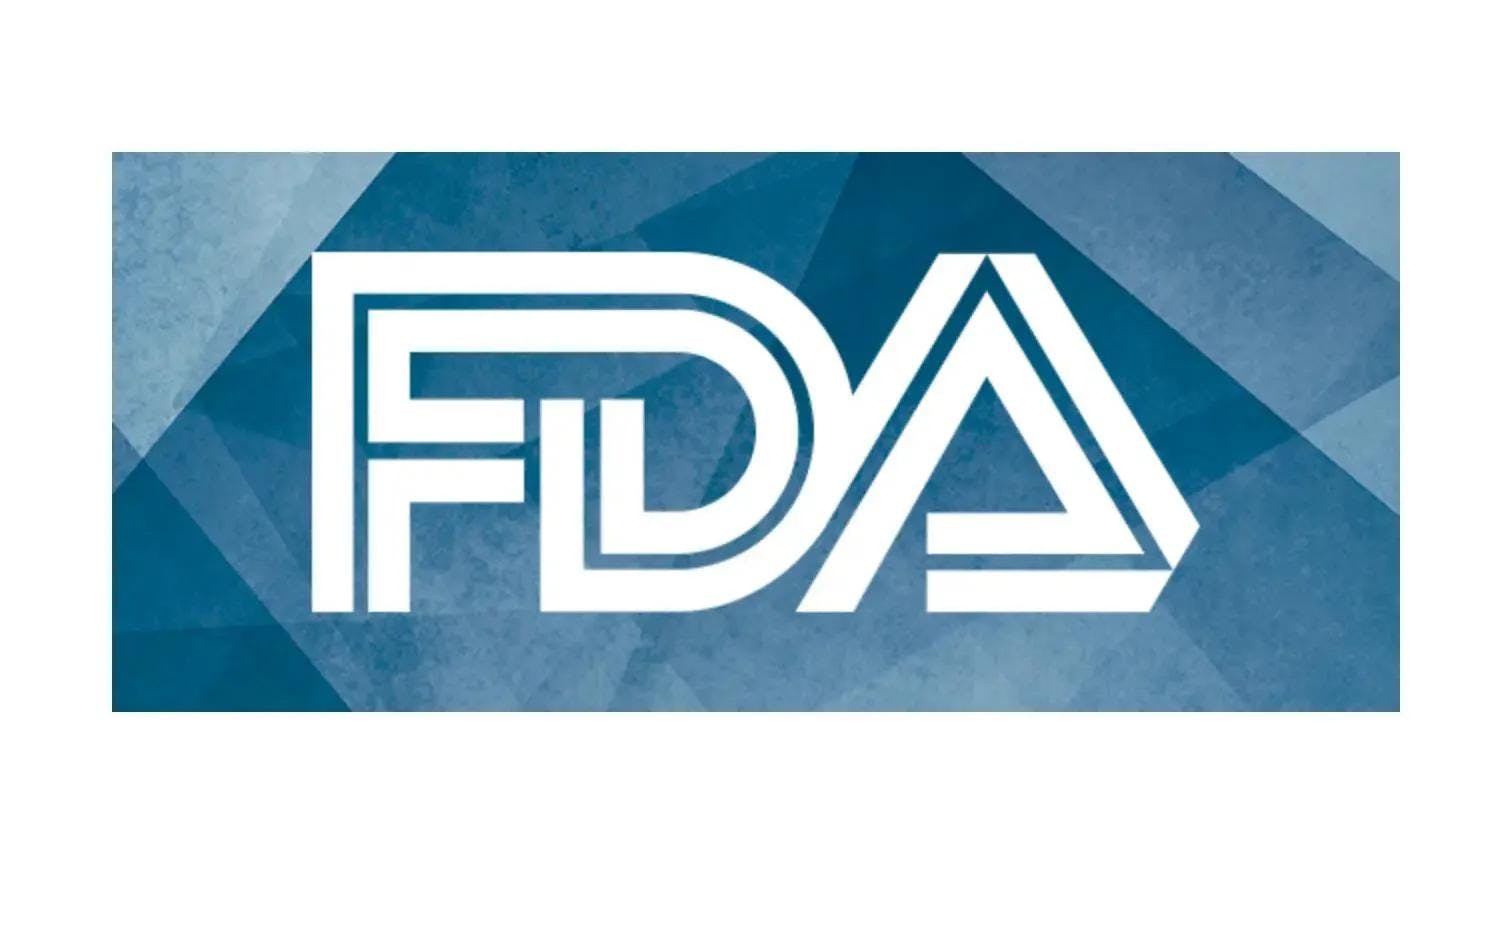 FDA Approves Iptacopan for the Treatment of Paroxysmal Nocturnal Hemoglobinuria in Adult Patients